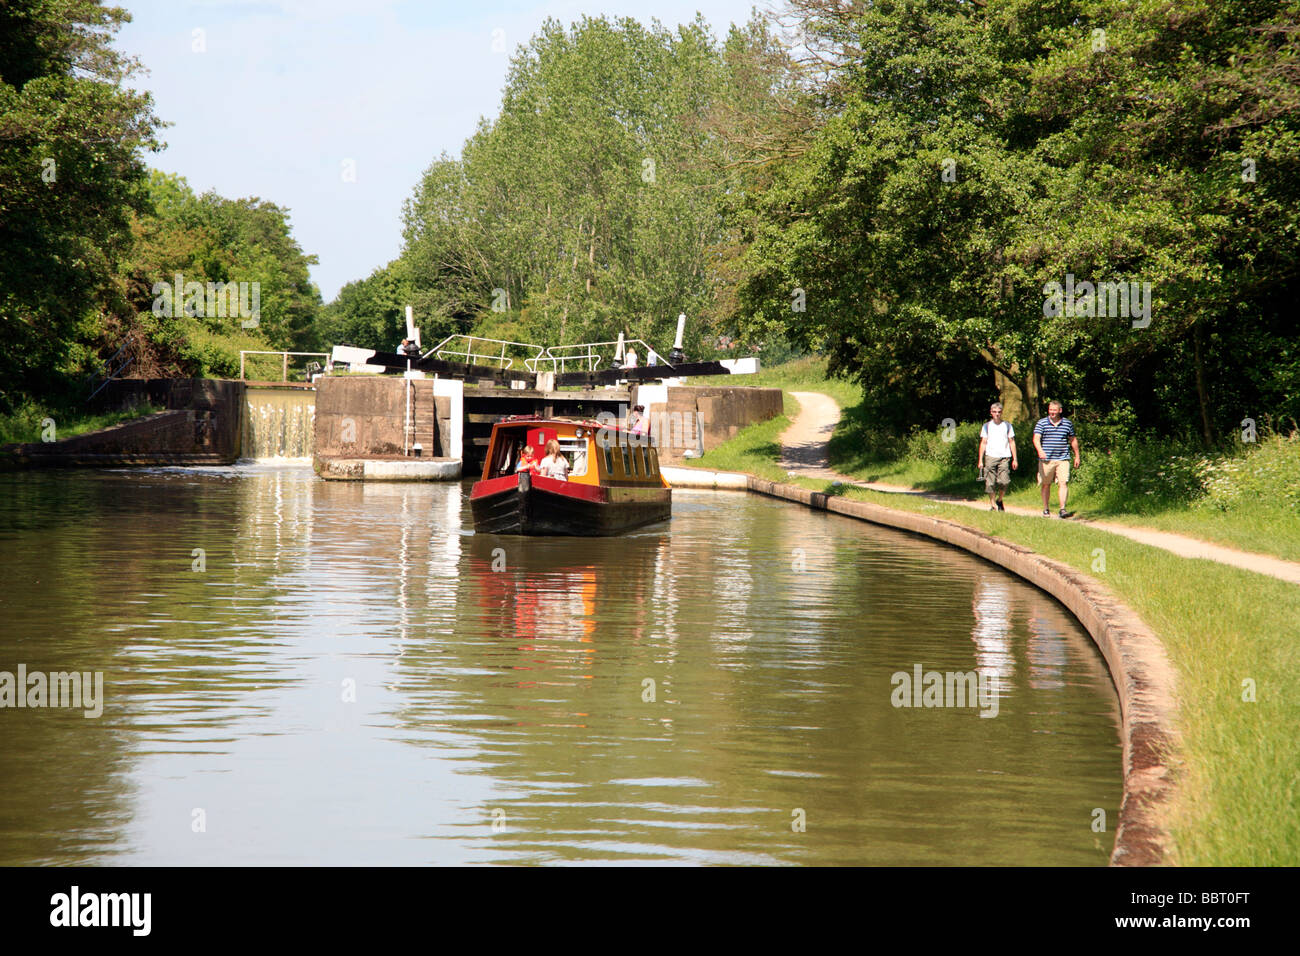 Grand Union Canal Hatton Locks Banque D'Images